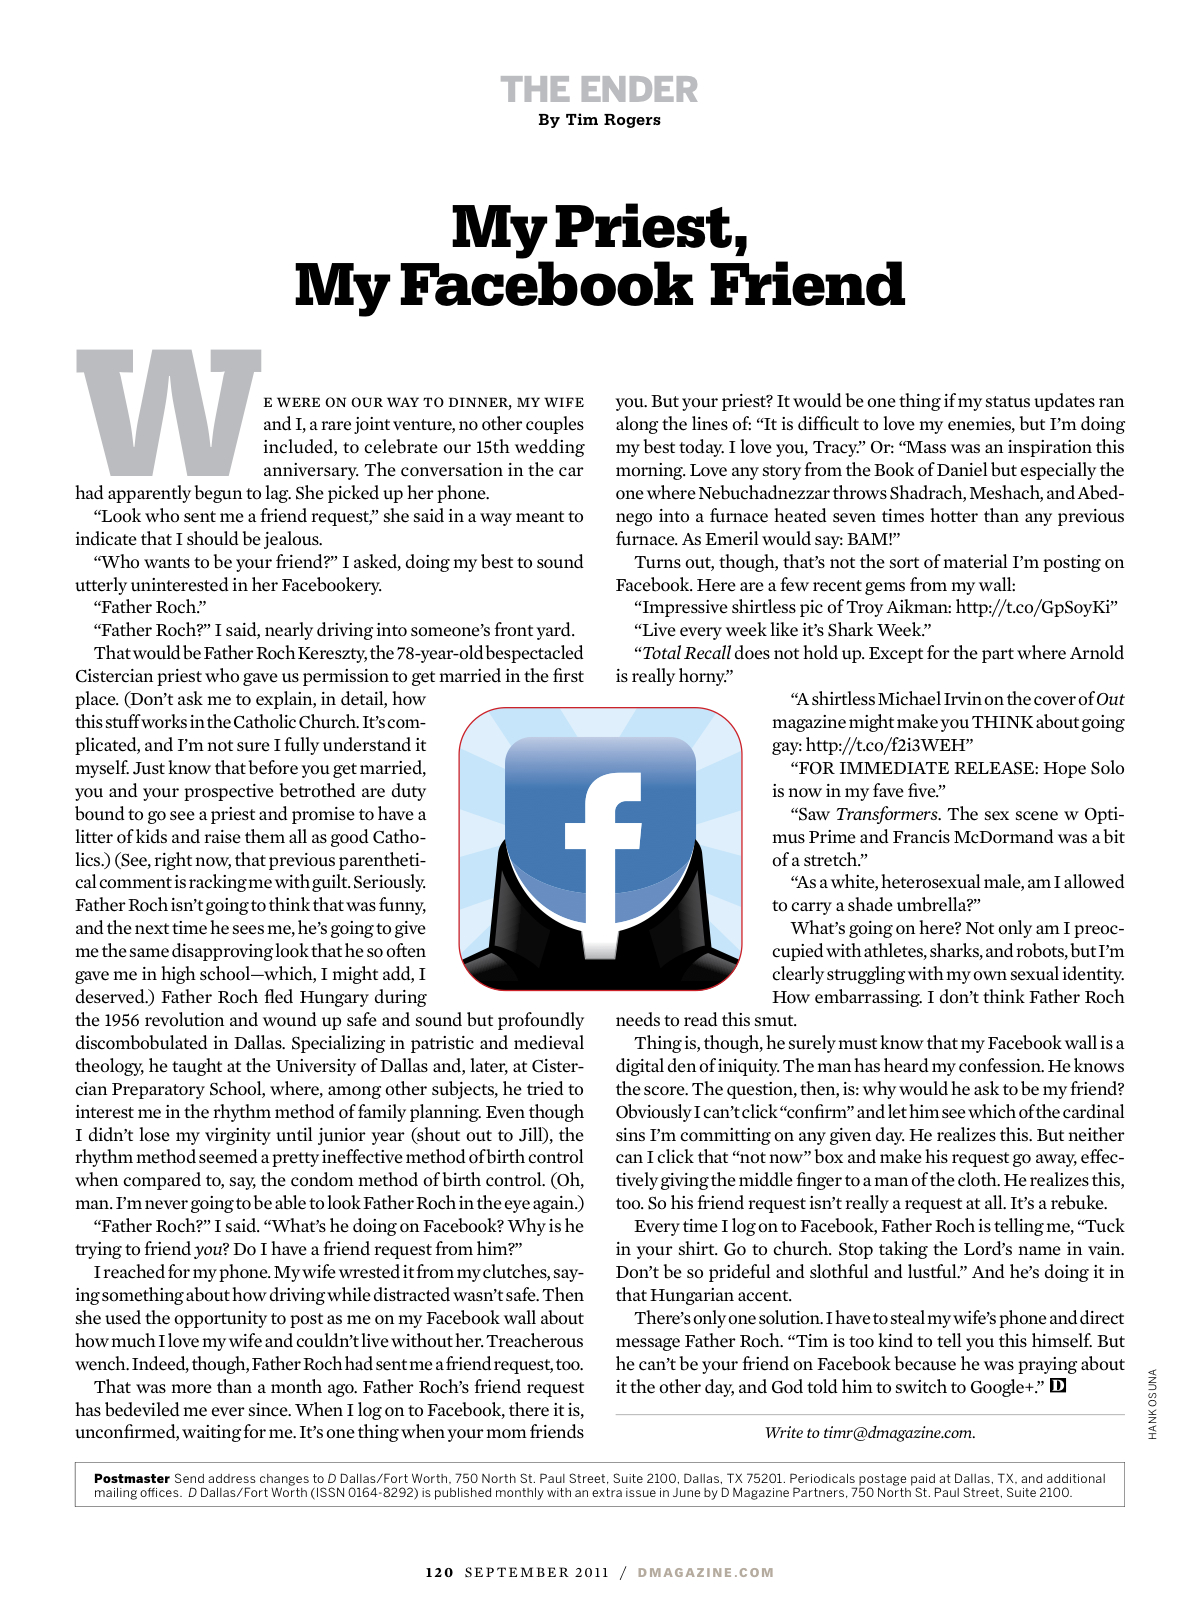 What Happens When Your Priest Tries to Friend You on Facebook? image